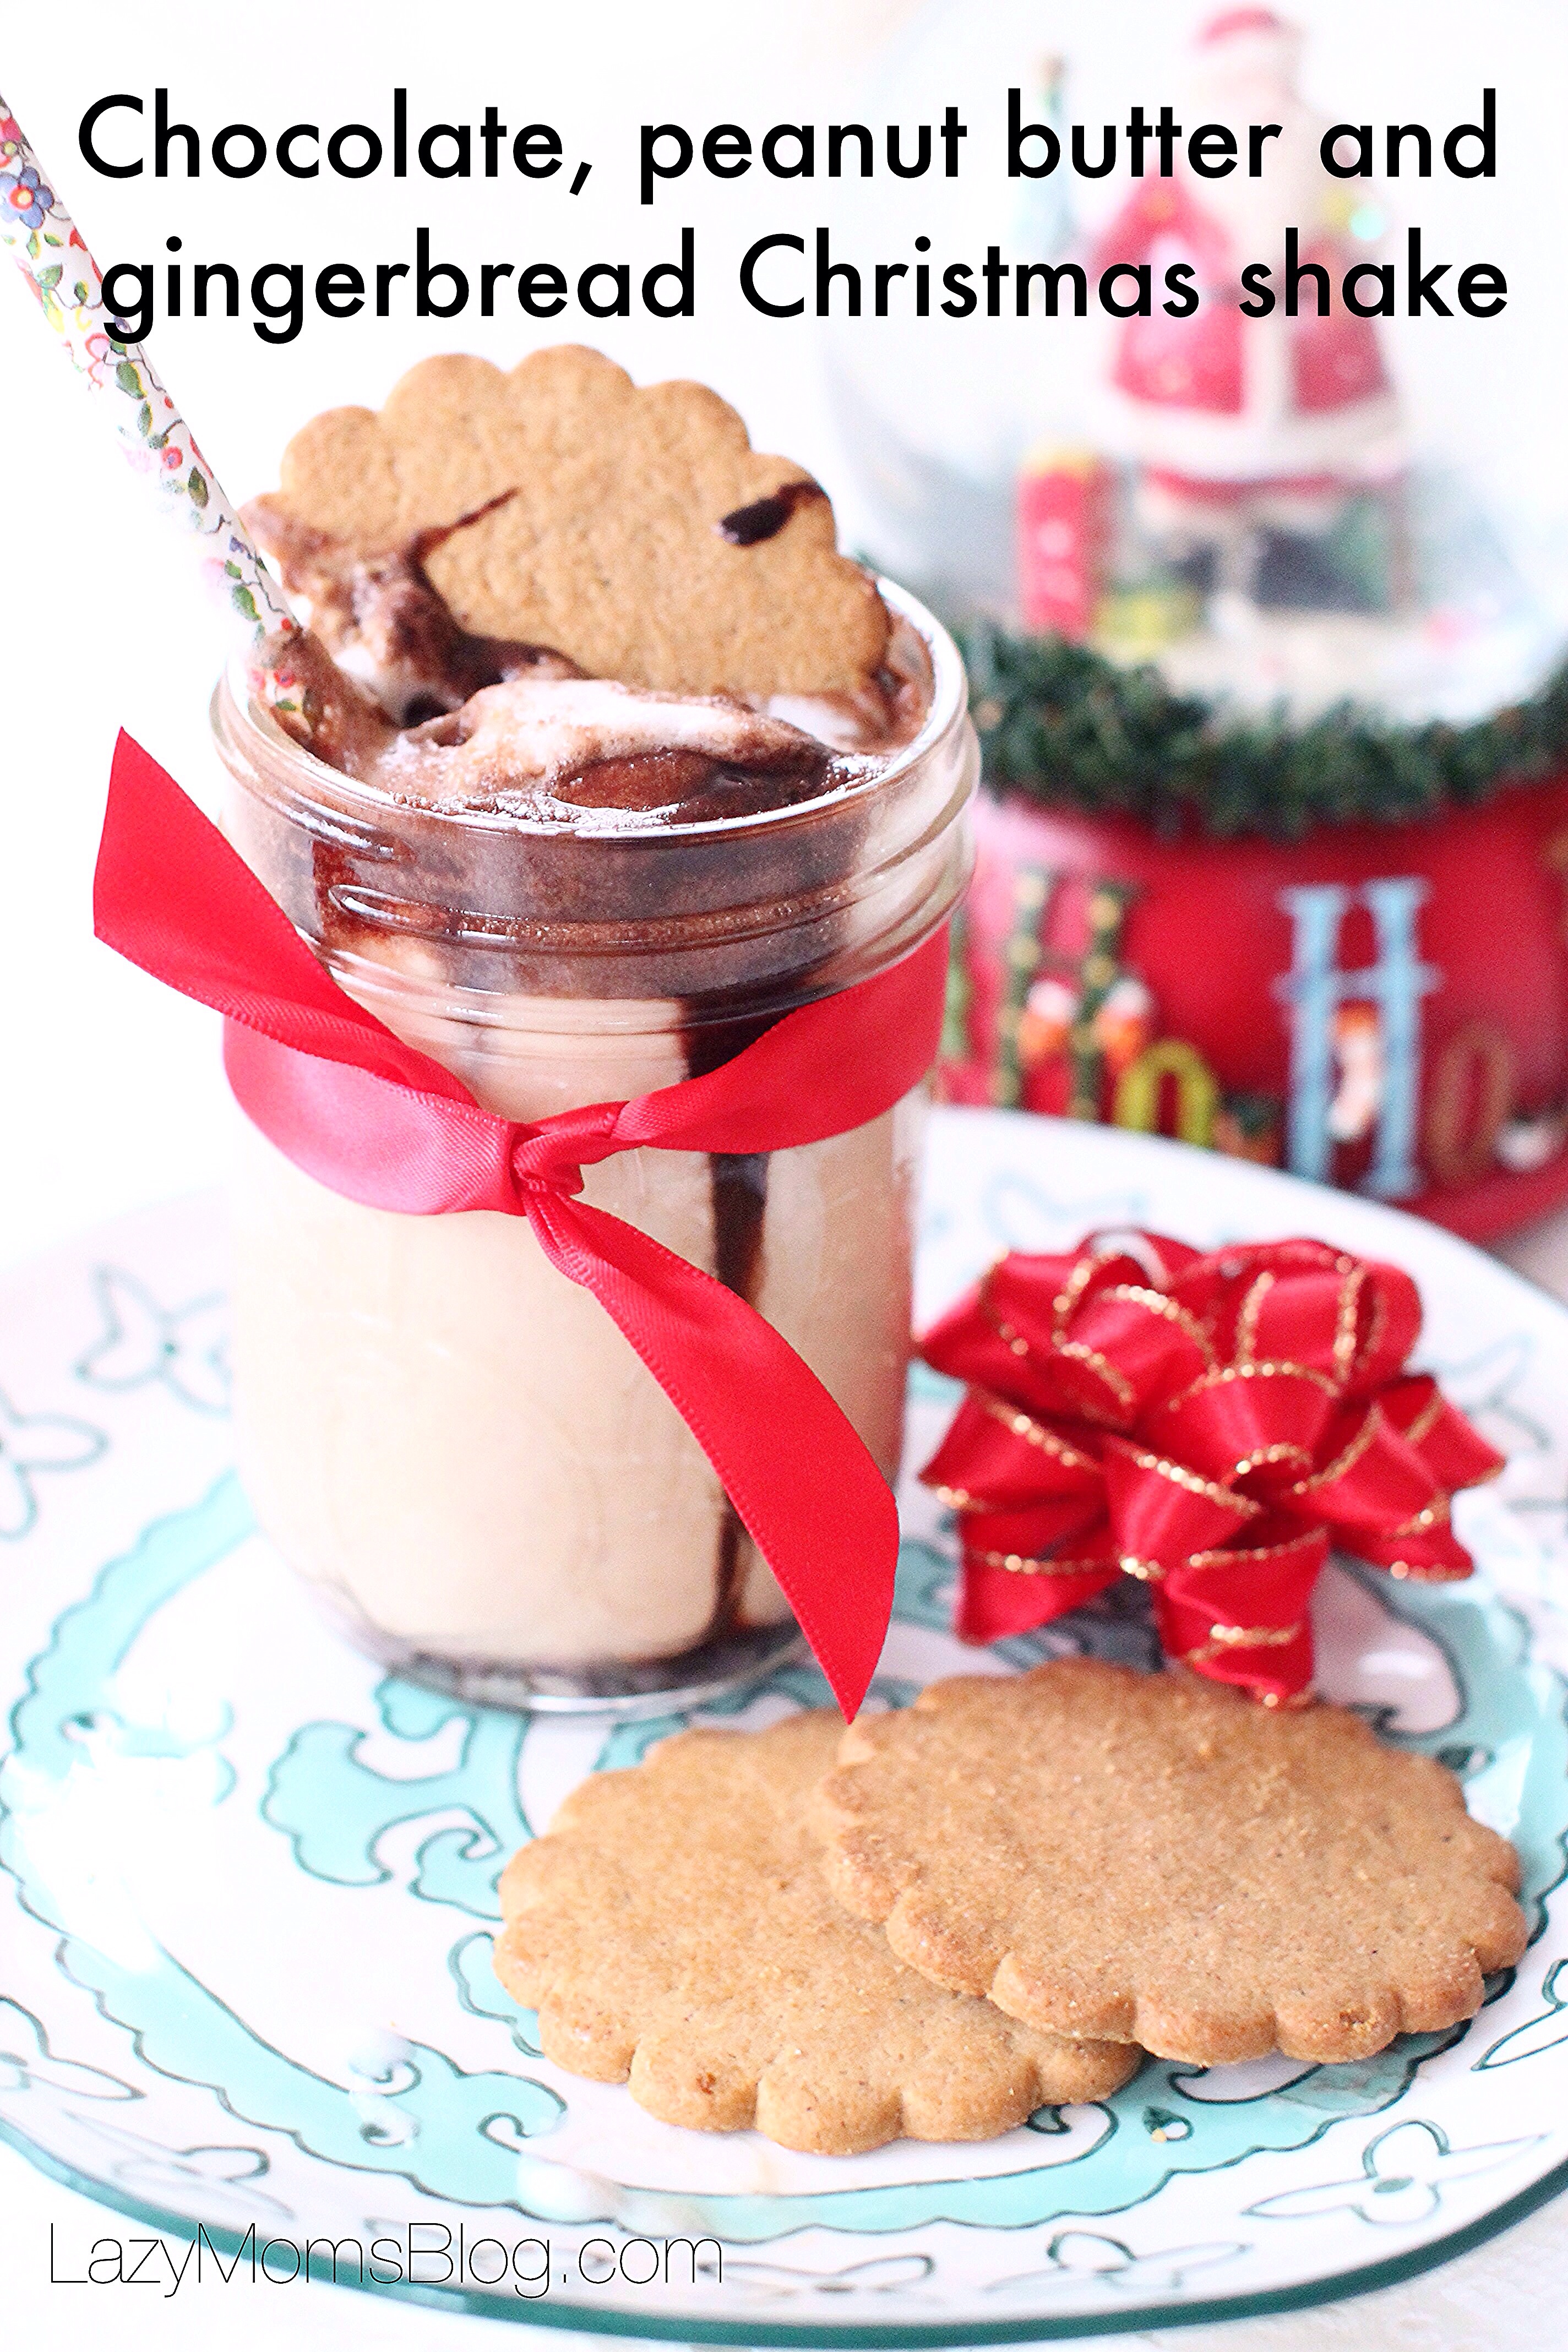 Chocolate, peanut butter and gingerbread Christmas shake: my new favourite festive treat!  